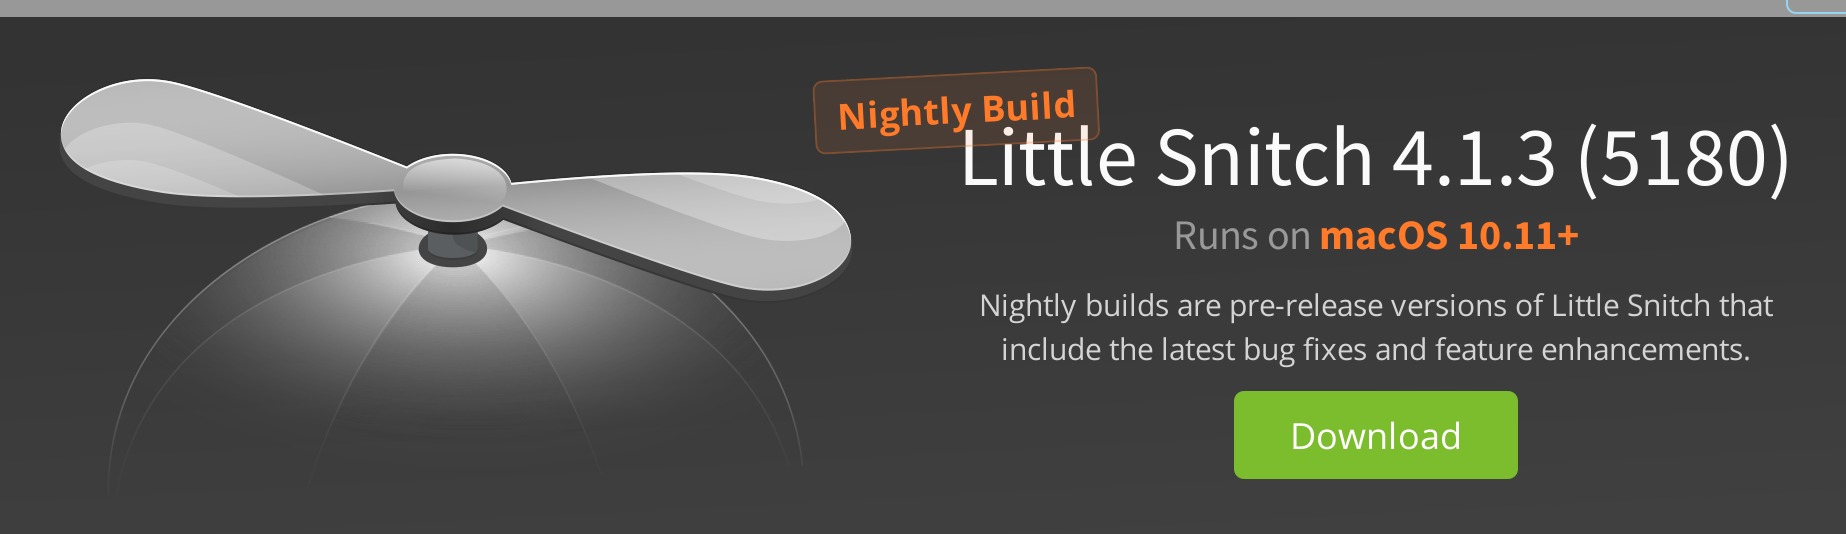 Header from the Little Snitch Nightly download web page showing the Little Snitch propeller hat logo, the following text: 'Nightly BuildLittle Snitch 4.1.3 (5180). Runs on macOS 10.11+. Nightly builds are pre-release versions of Little Snitch that include the latest bug fixes and feature enhancements.', and a green Download button.